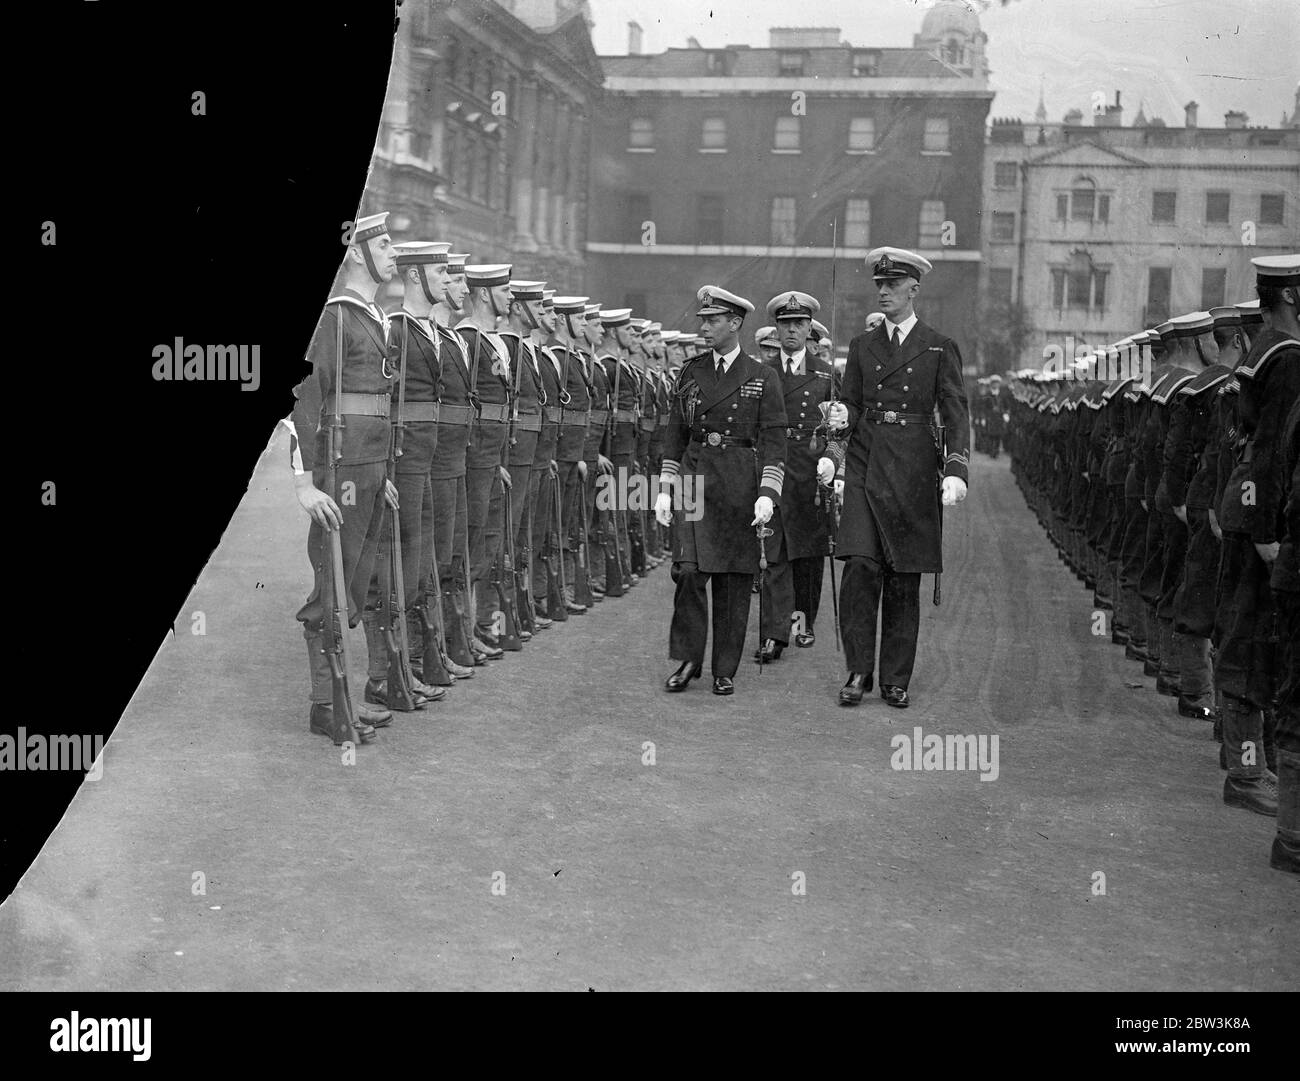 Duke of York inspects Royal Naval Volunteer Reserve Association on Horse Guards . The Duke of York , as an Admiral , inspected members of the Royal Naval Volunteer Reserve Association on the Horse Guards Parade , Whitehall . Photo shows , the Duke of York inspecting the lines. 9 May 1936 Stock Photo